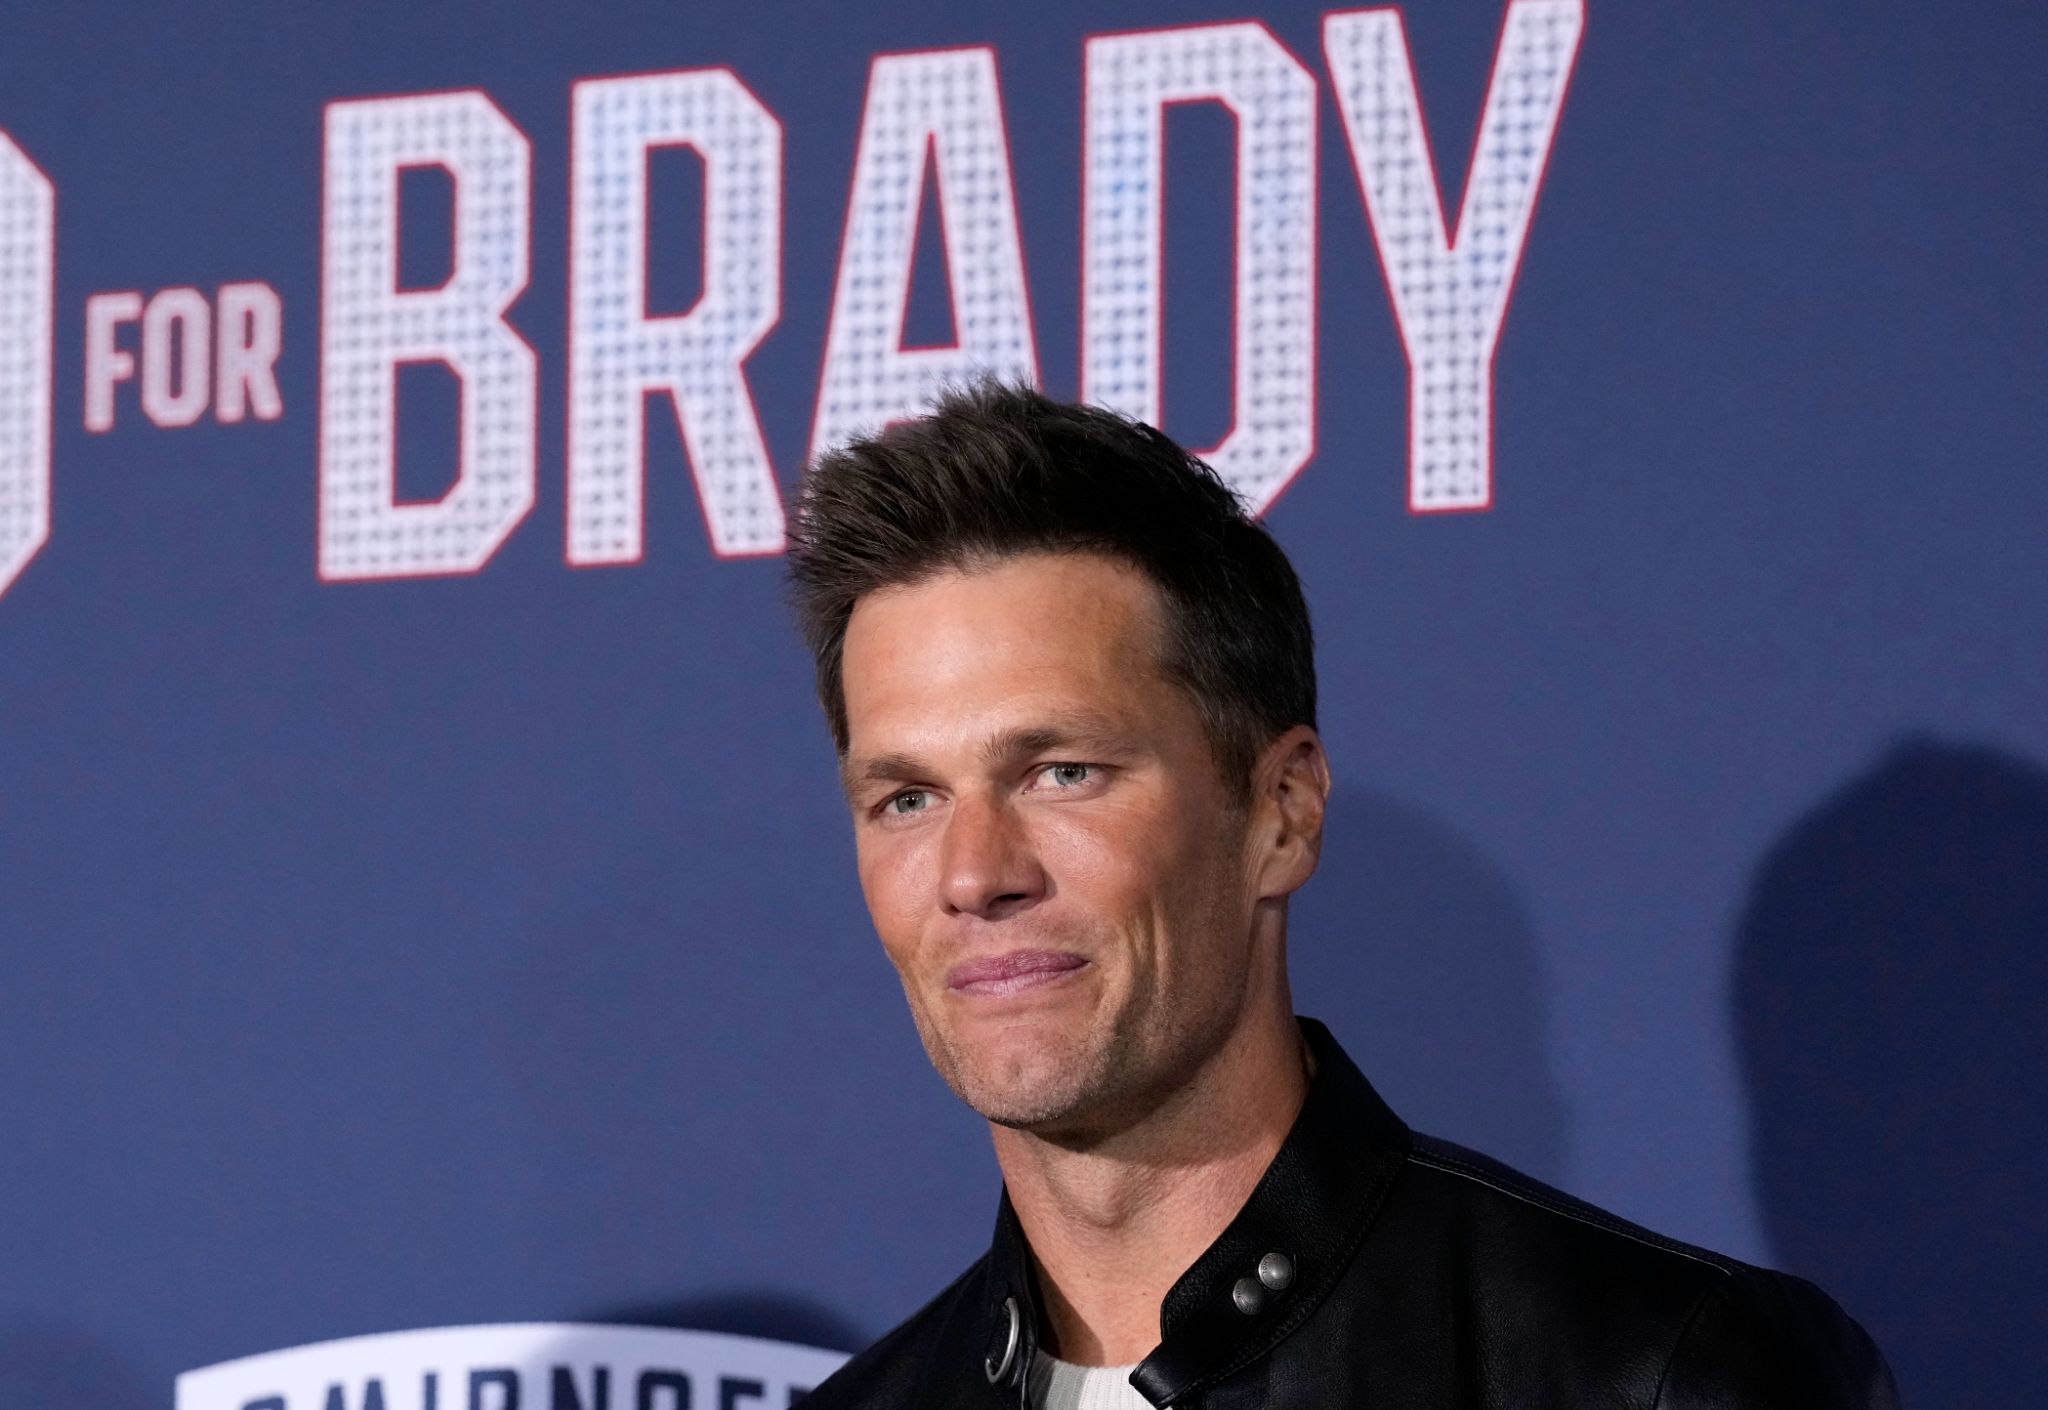 Opinion | Tom Brady retires. Next stop? The broadcast booth.